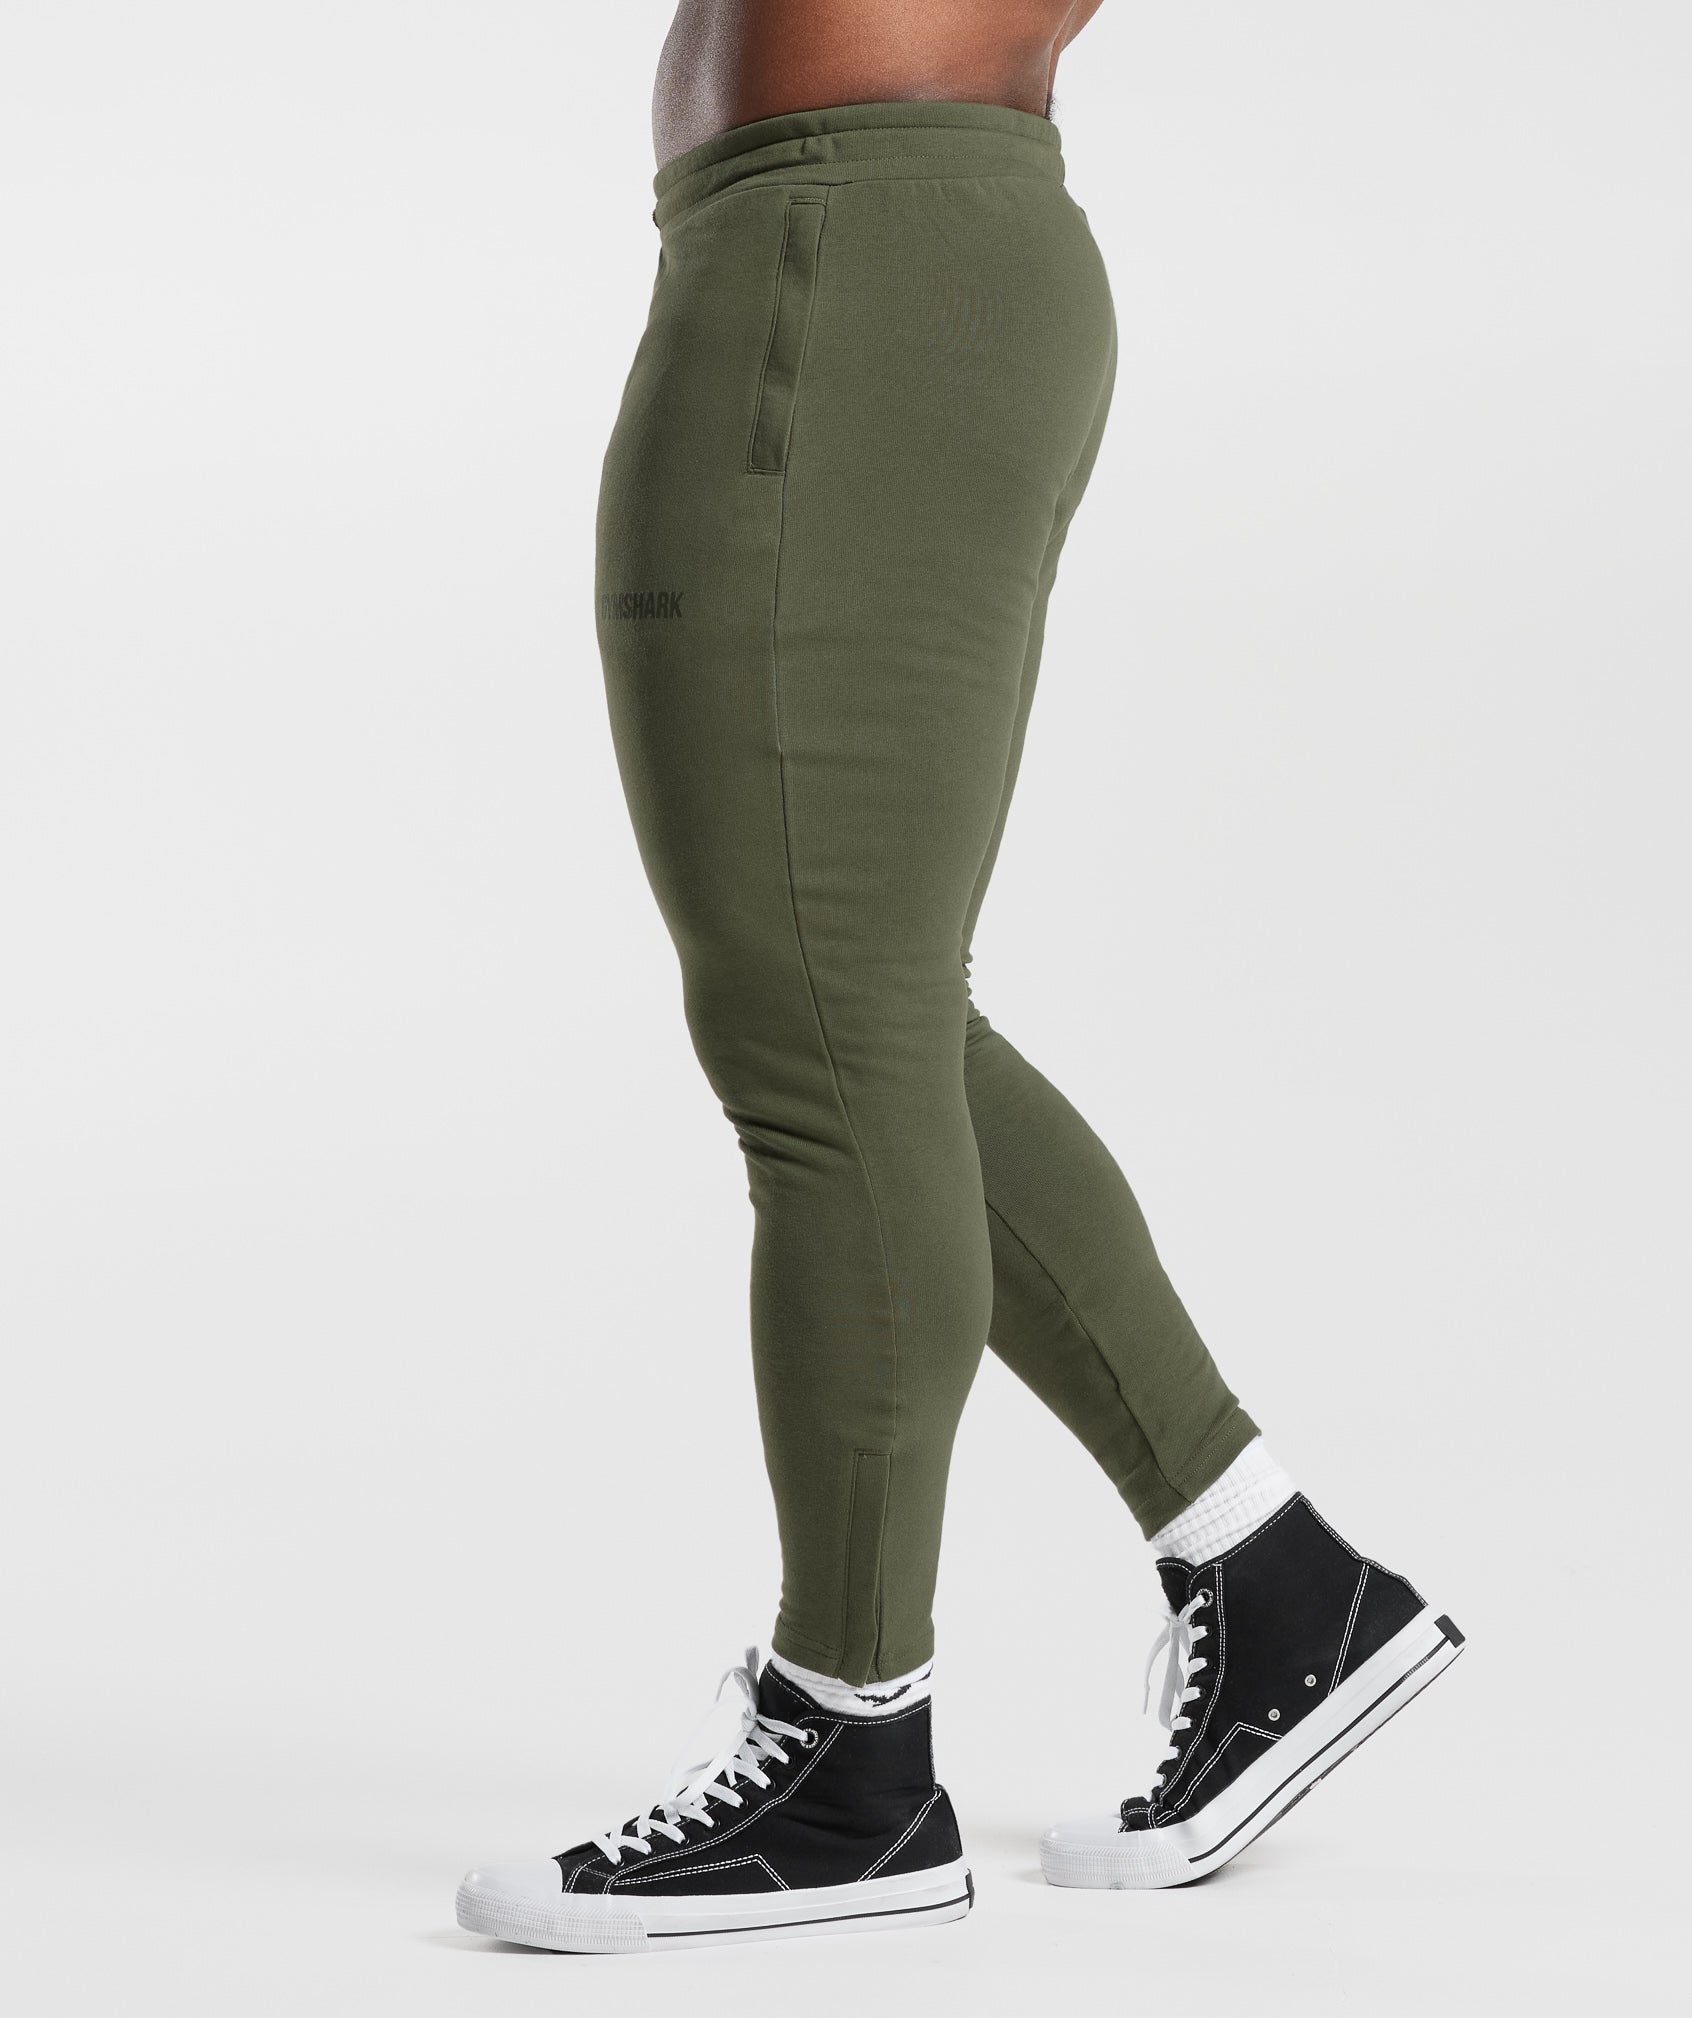 Apollo Muscle Fit Joggers in Core Olive - view 3